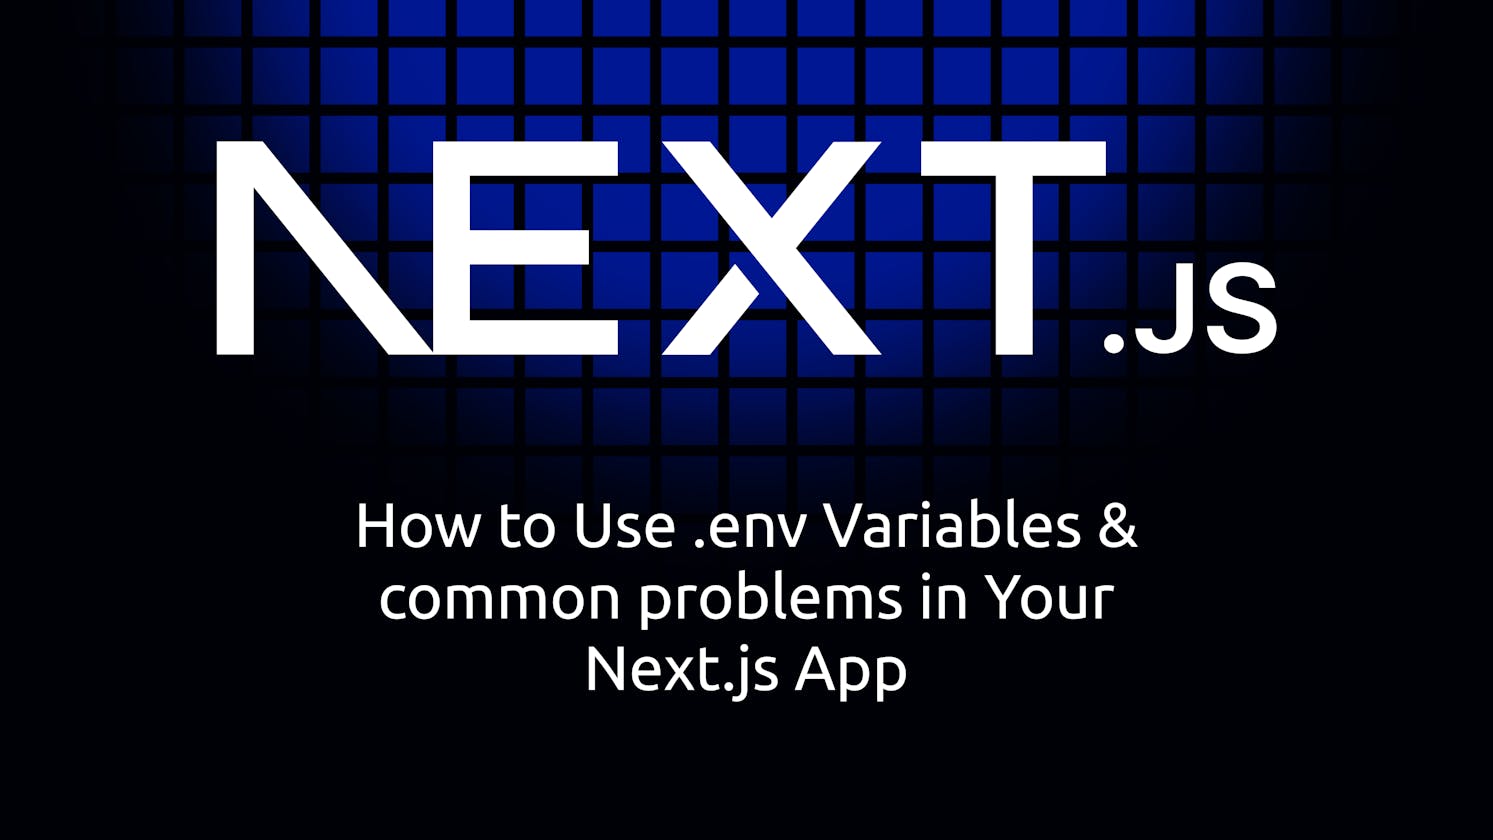 How to Use .env Variables & common problems in Your Next.js App